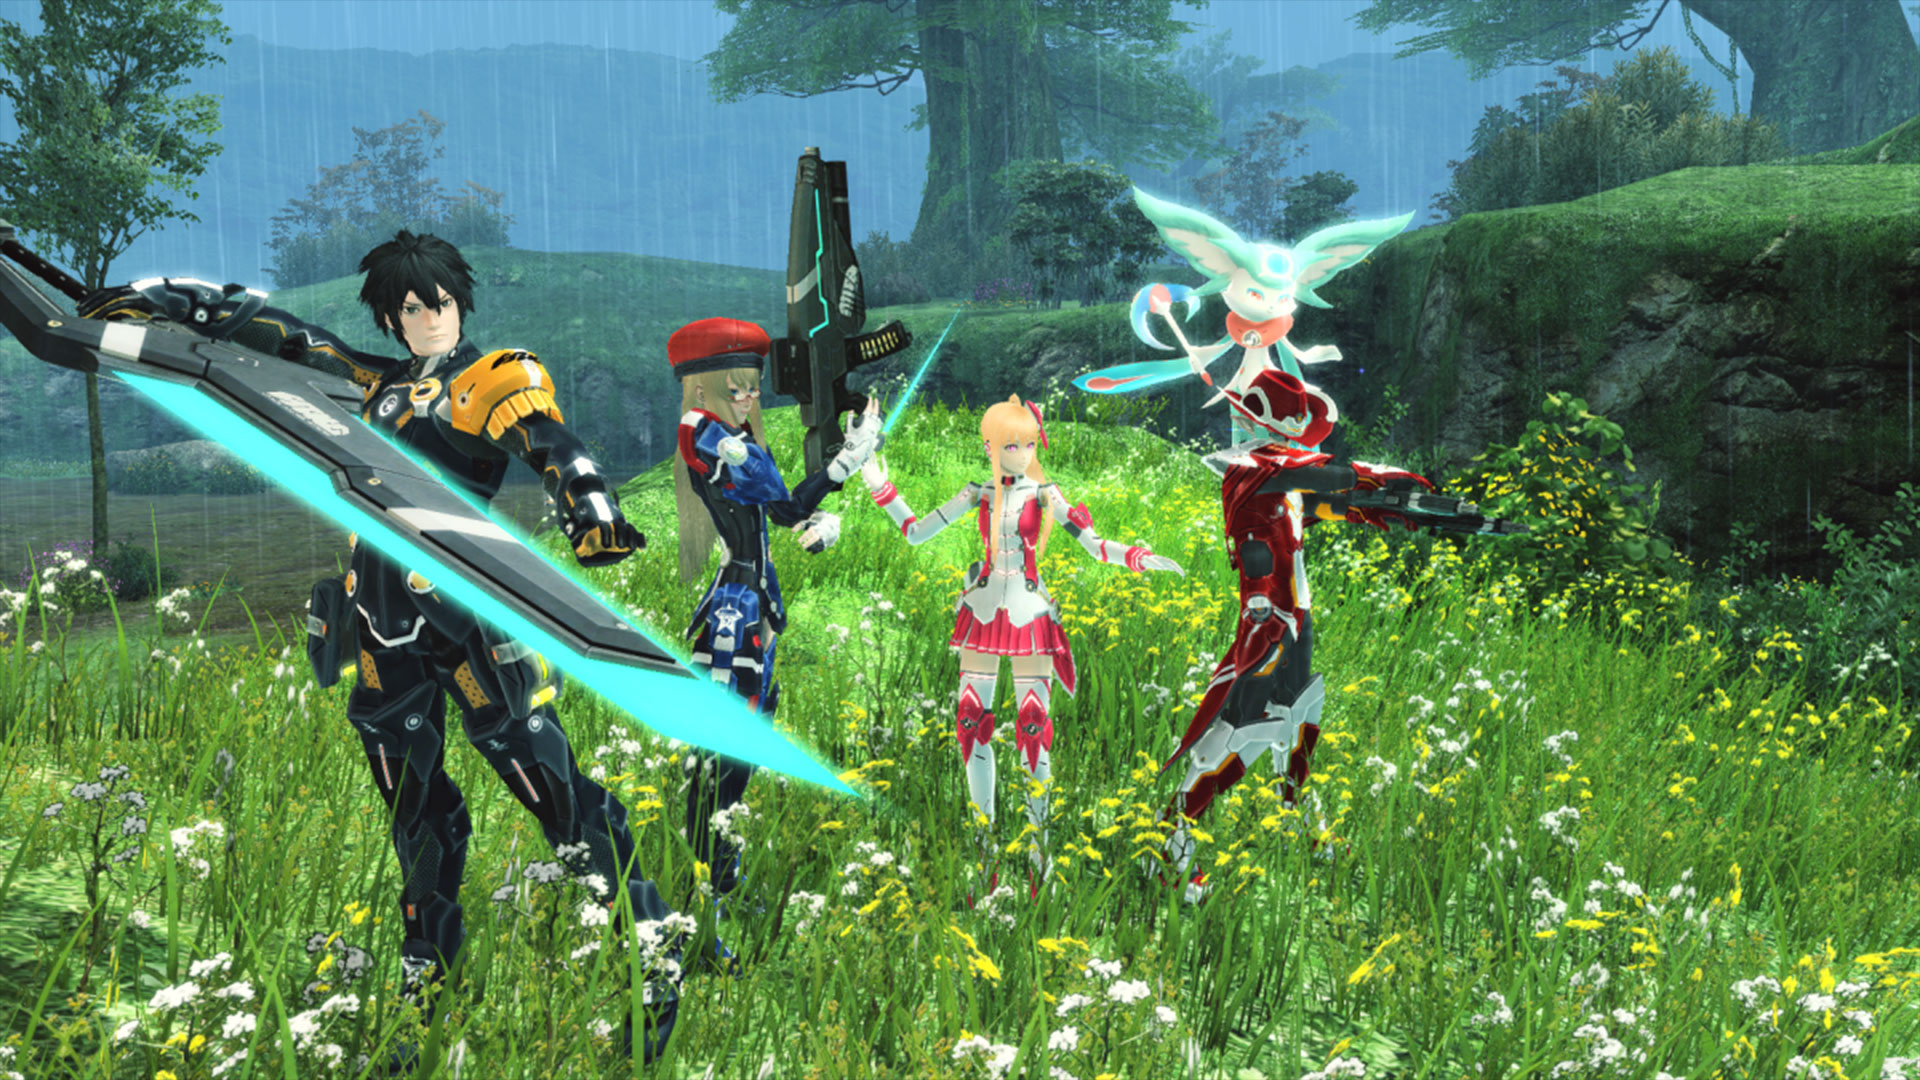 Phantasy Star Online 2 open beta to launch in North America 1